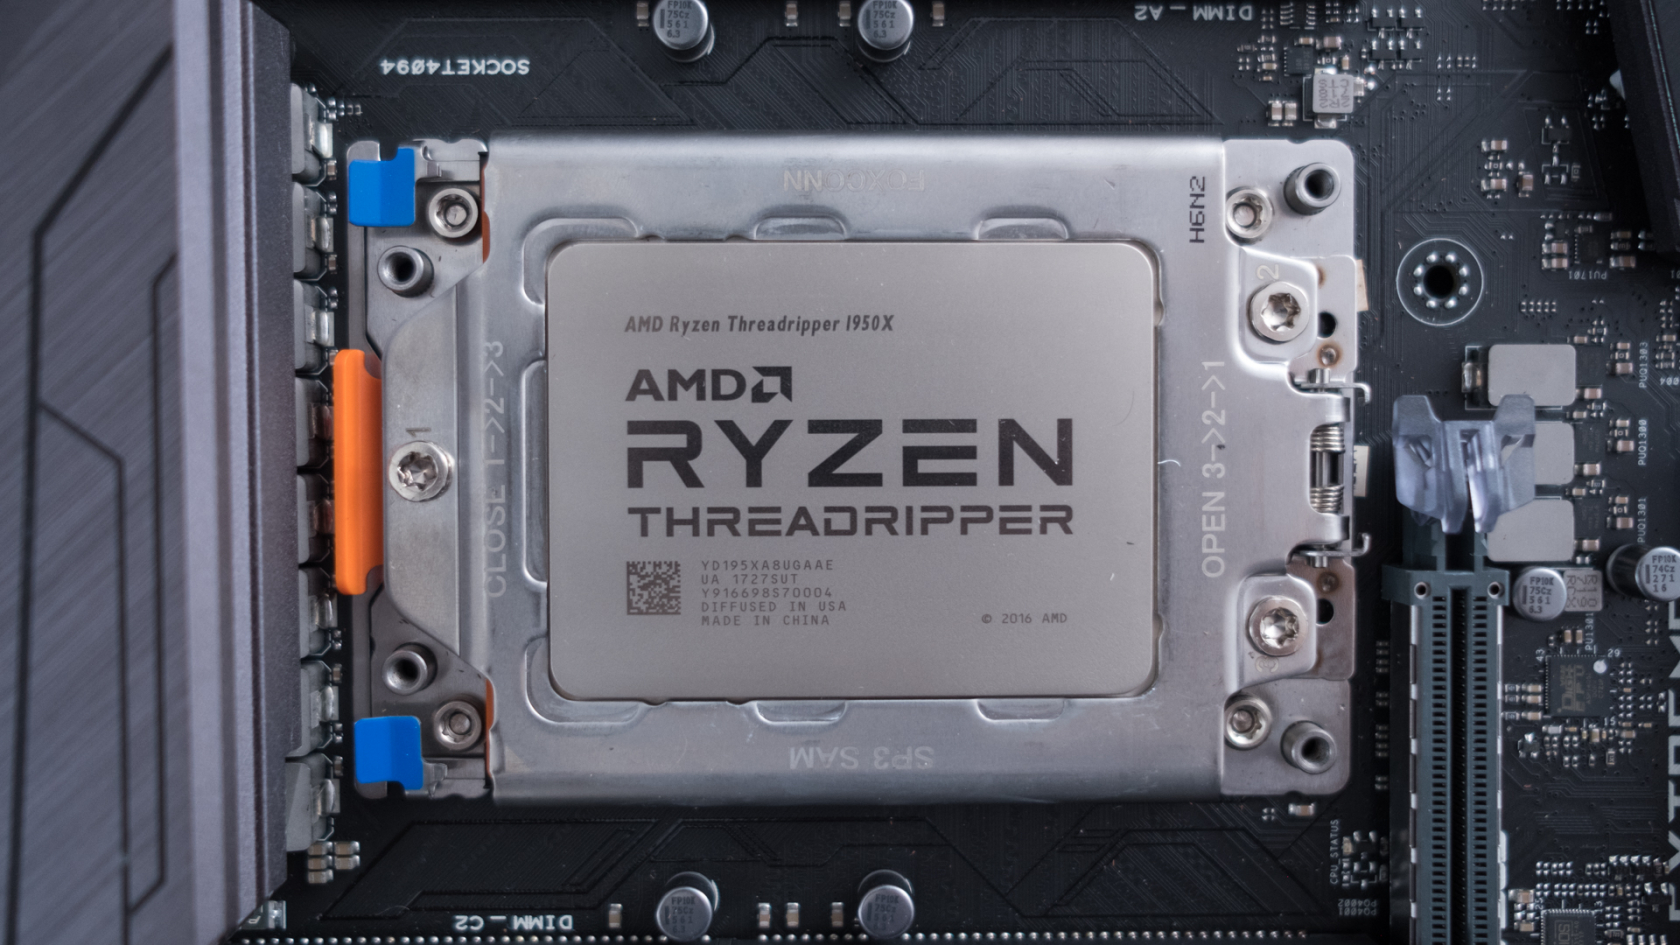 Second generation Threadripper CPUs spotted along with more Ryzen models